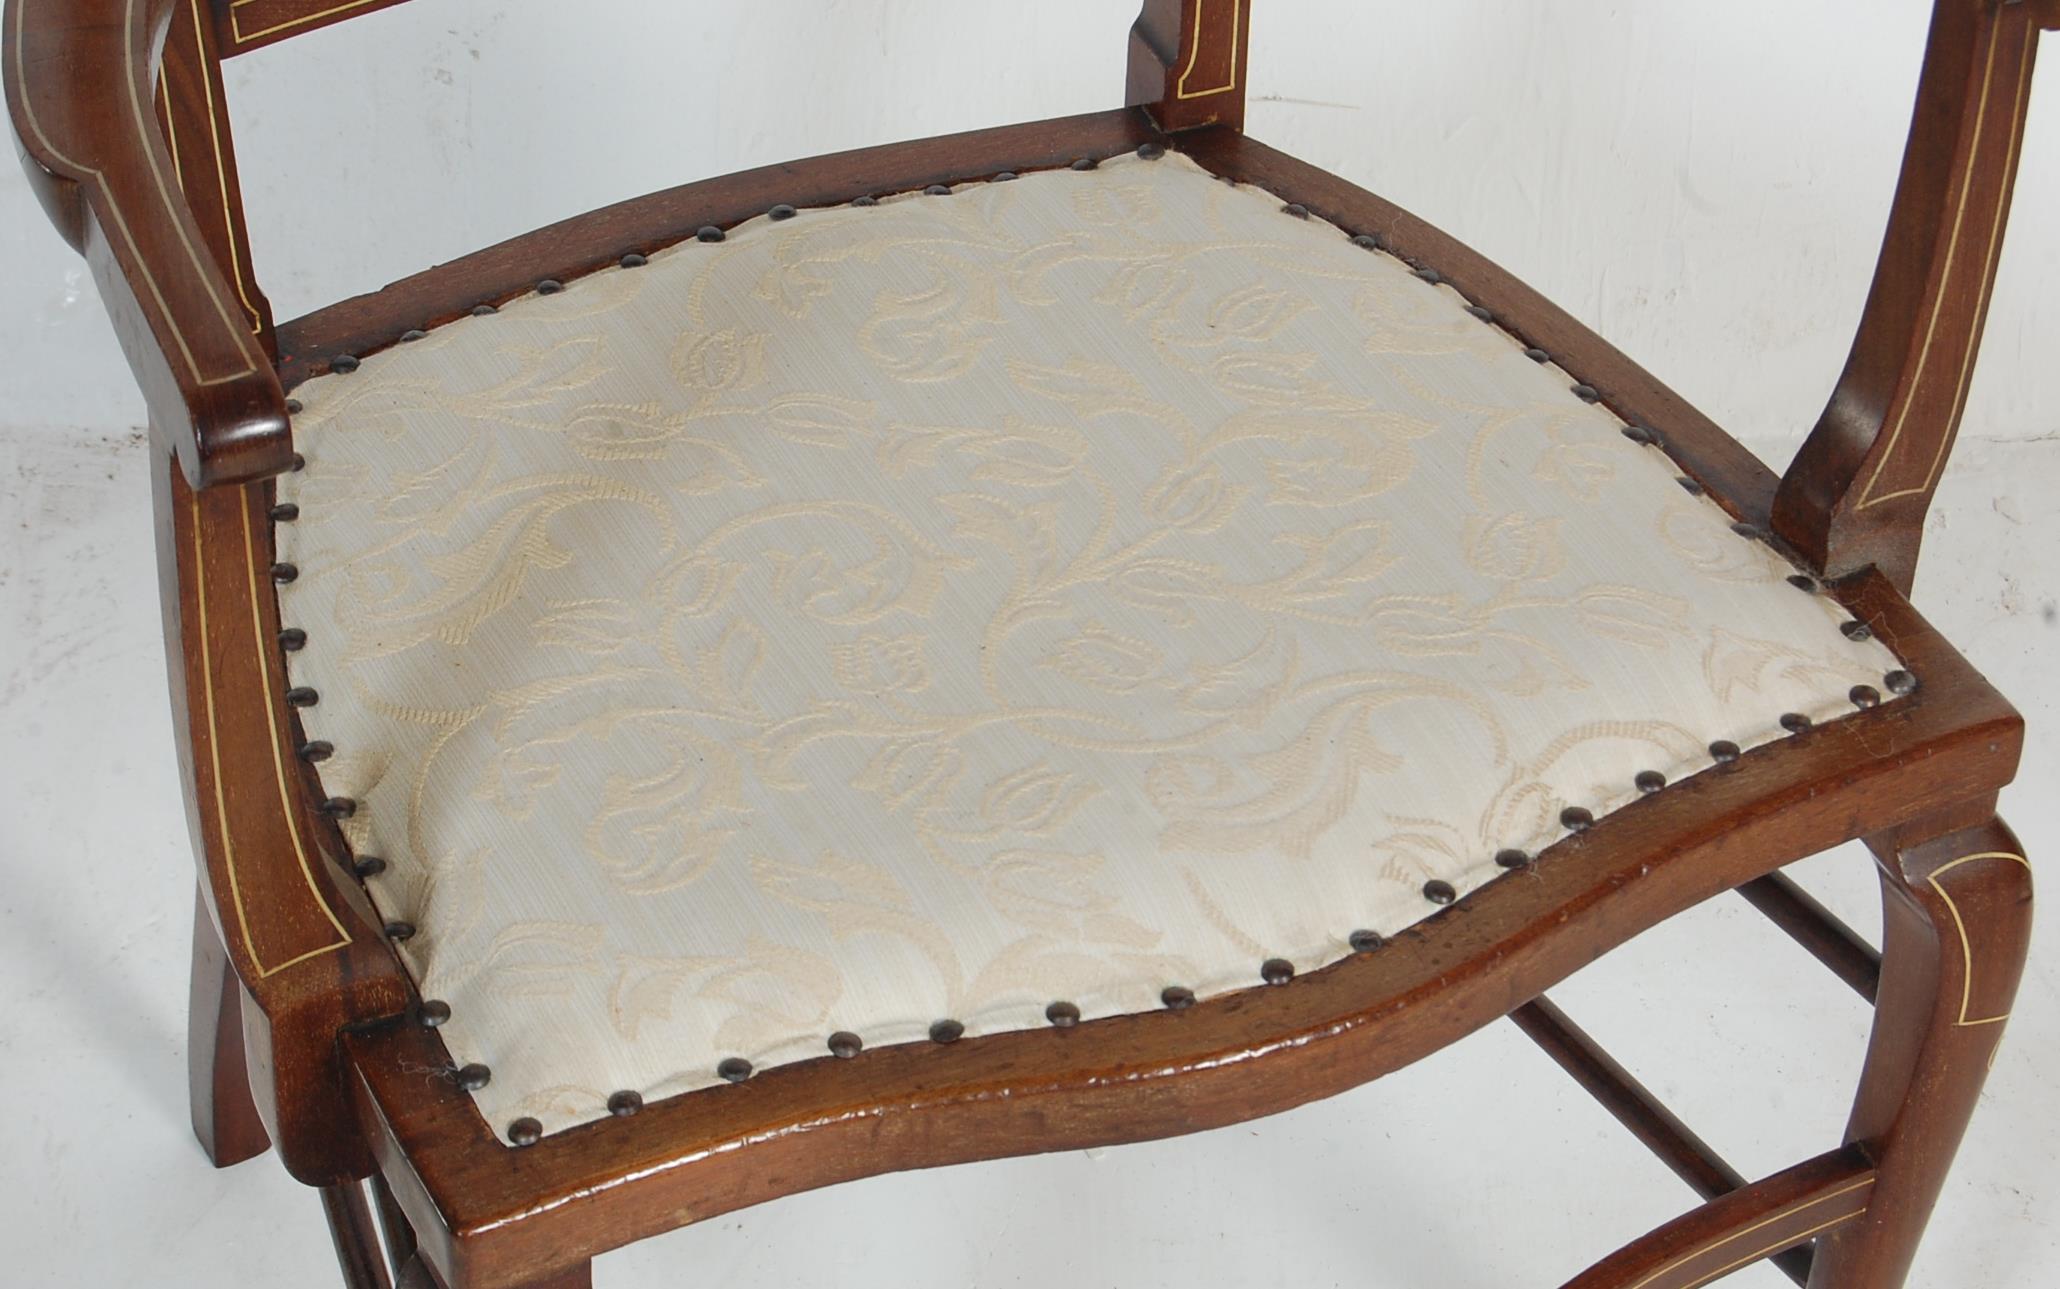 EDWARDIAN MARQUETRY INLAID MAHOGANY ARMCHAIR - Image 2 of 6